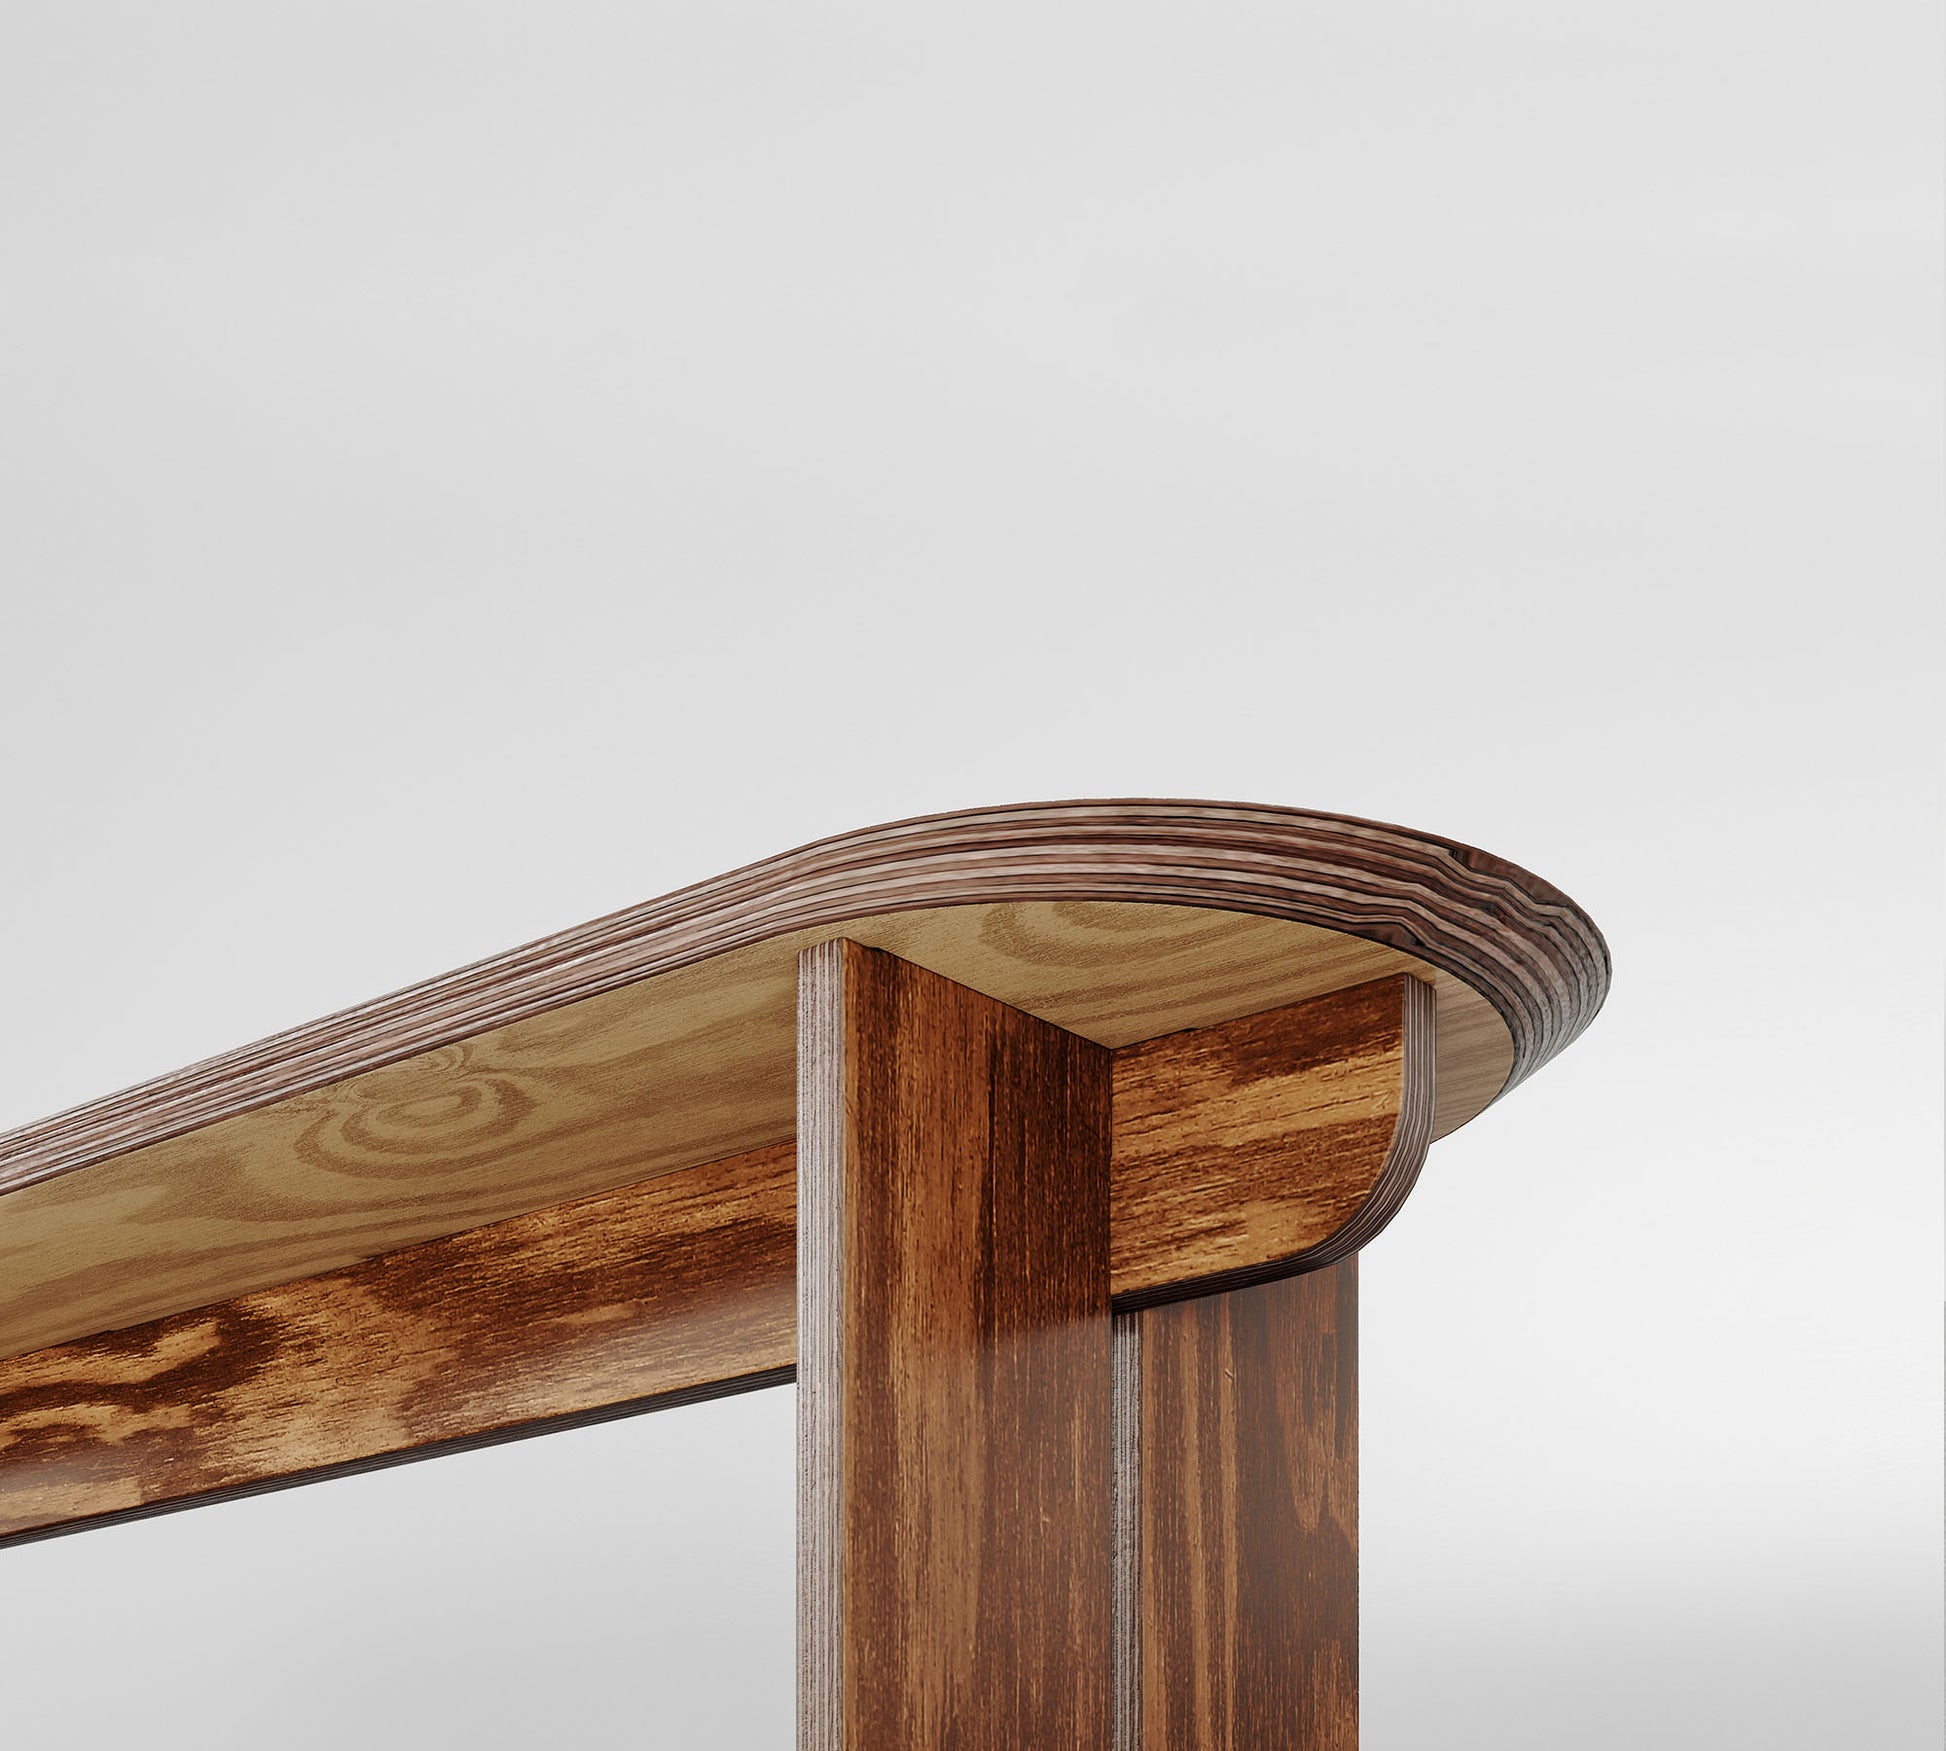 Curved wooden bench underside with a smooth finish, showcasing the natural beauty of the wood grain